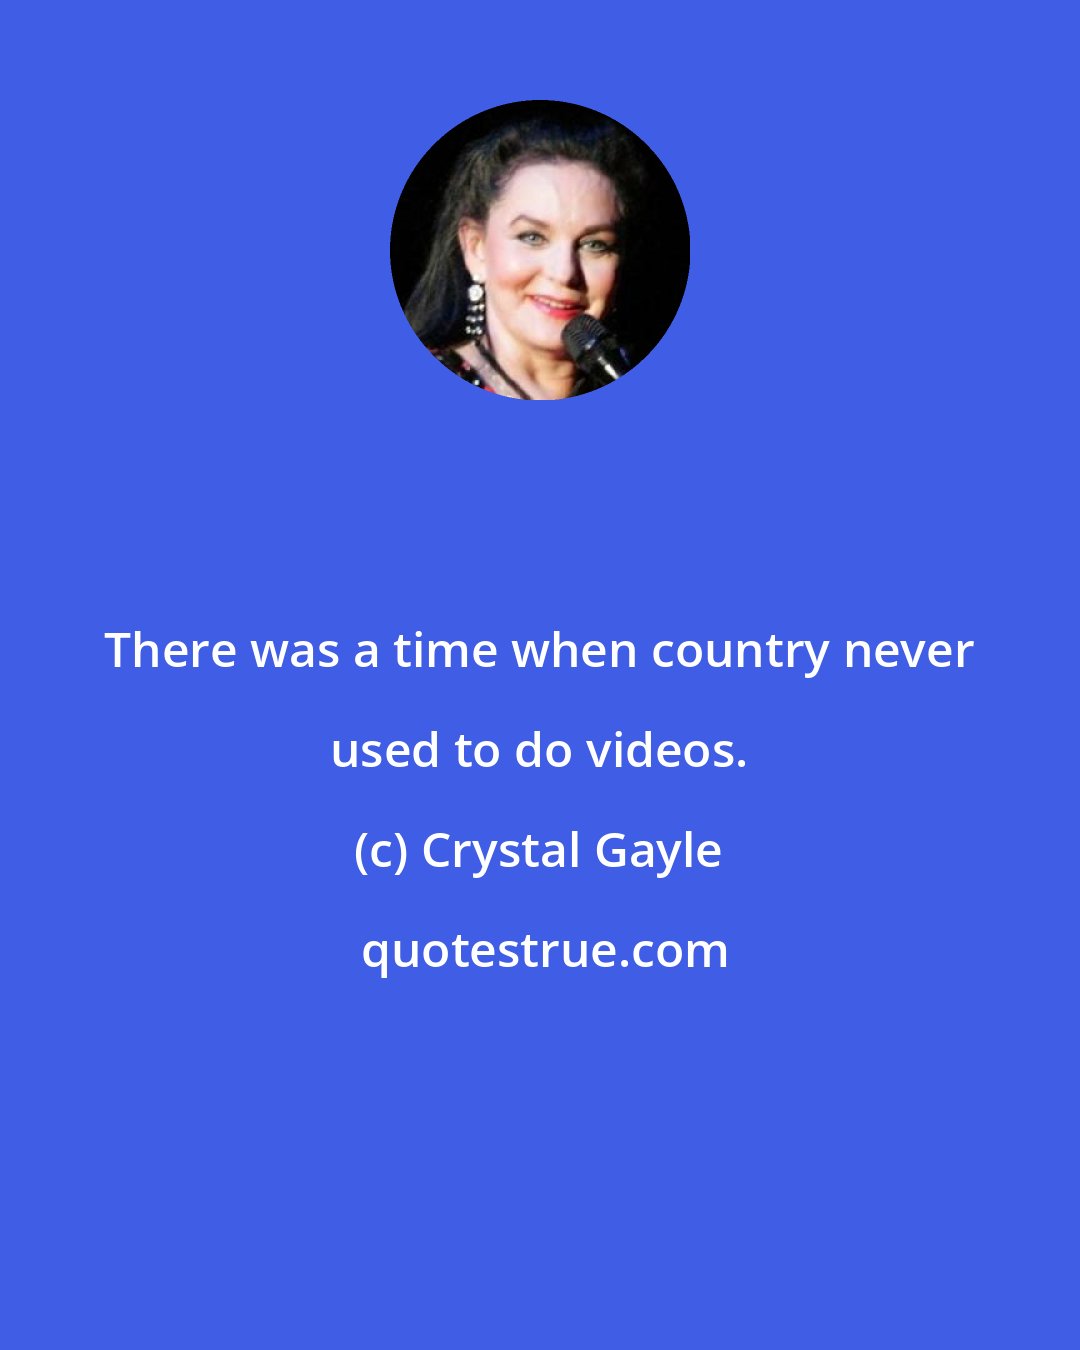 Crystal Gayle: There was a time when country never used to do videos.